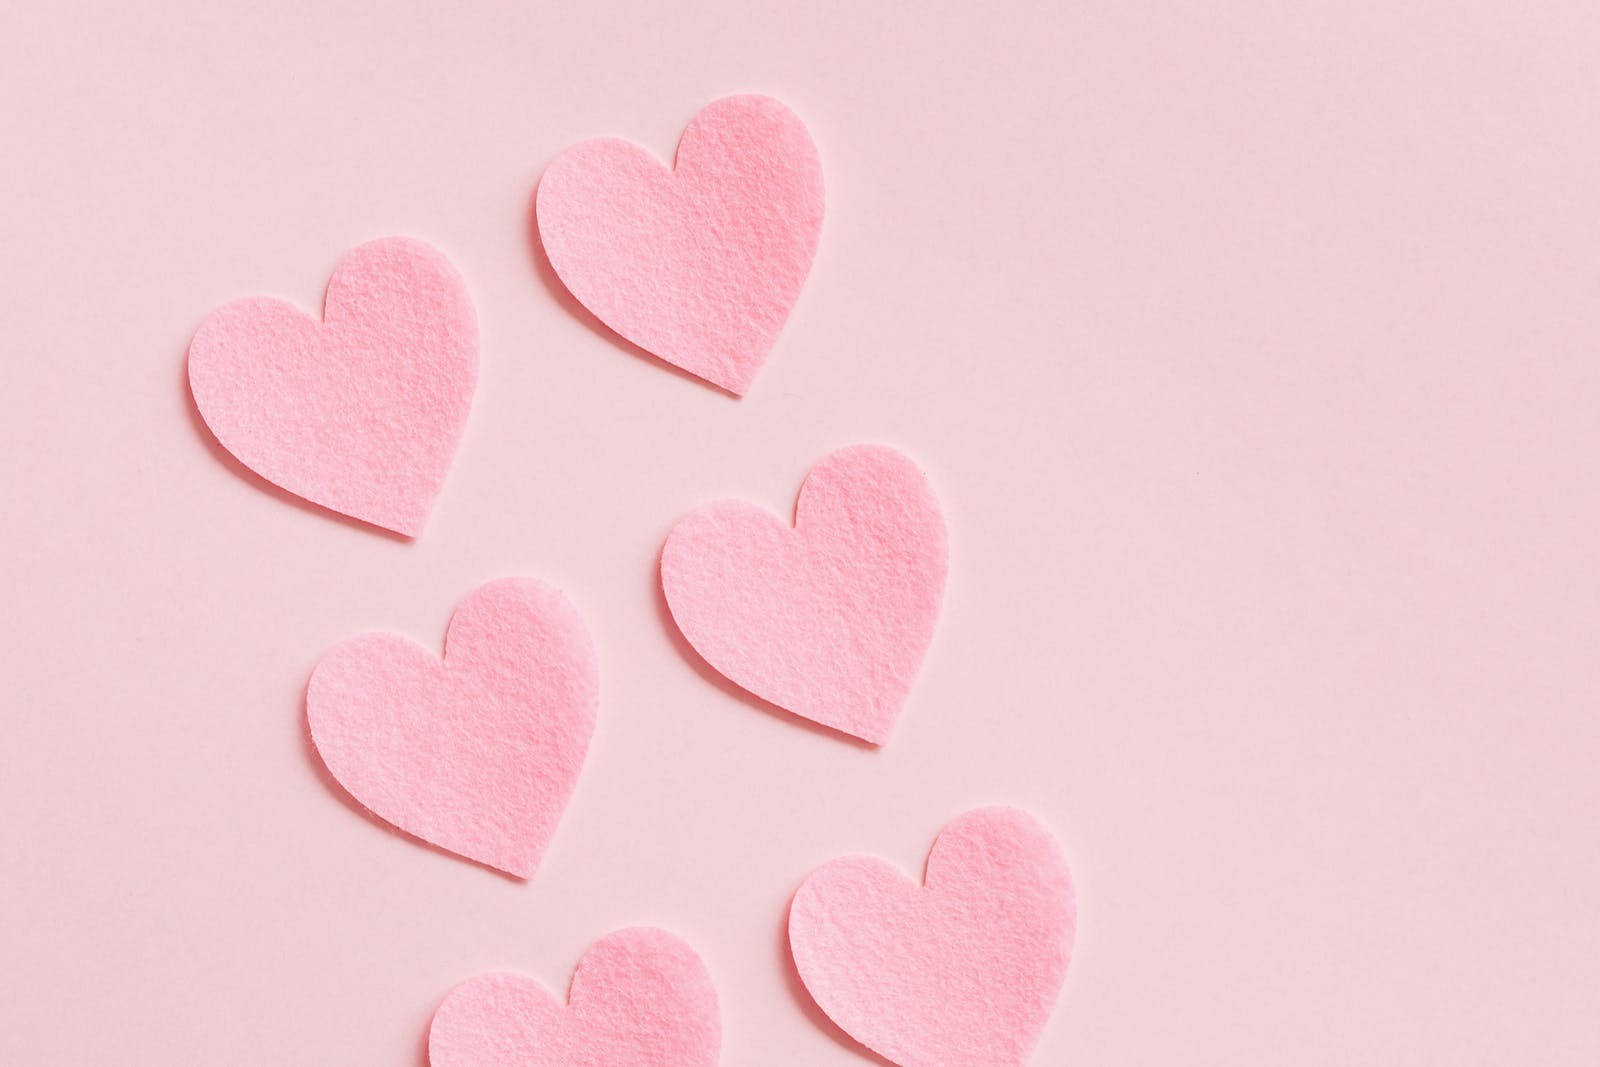 Pastel Pink Heart Cutouts In Pairs Background